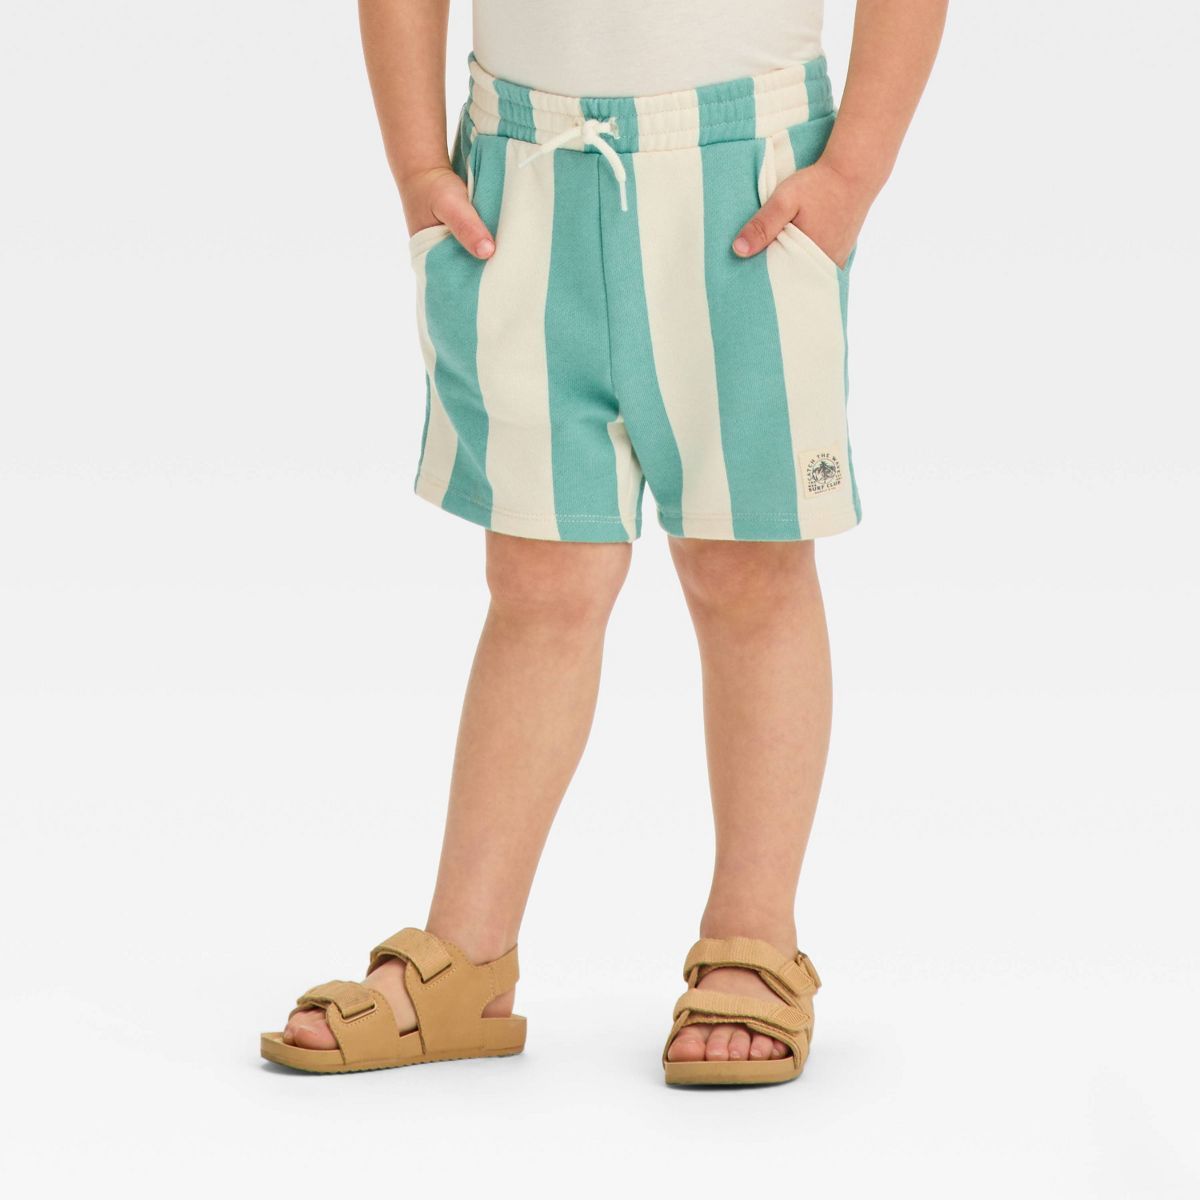 Grayson Mini Toddler Boys' Teal Striped Pull-On Cargo Shorts - Blue 12M | Target